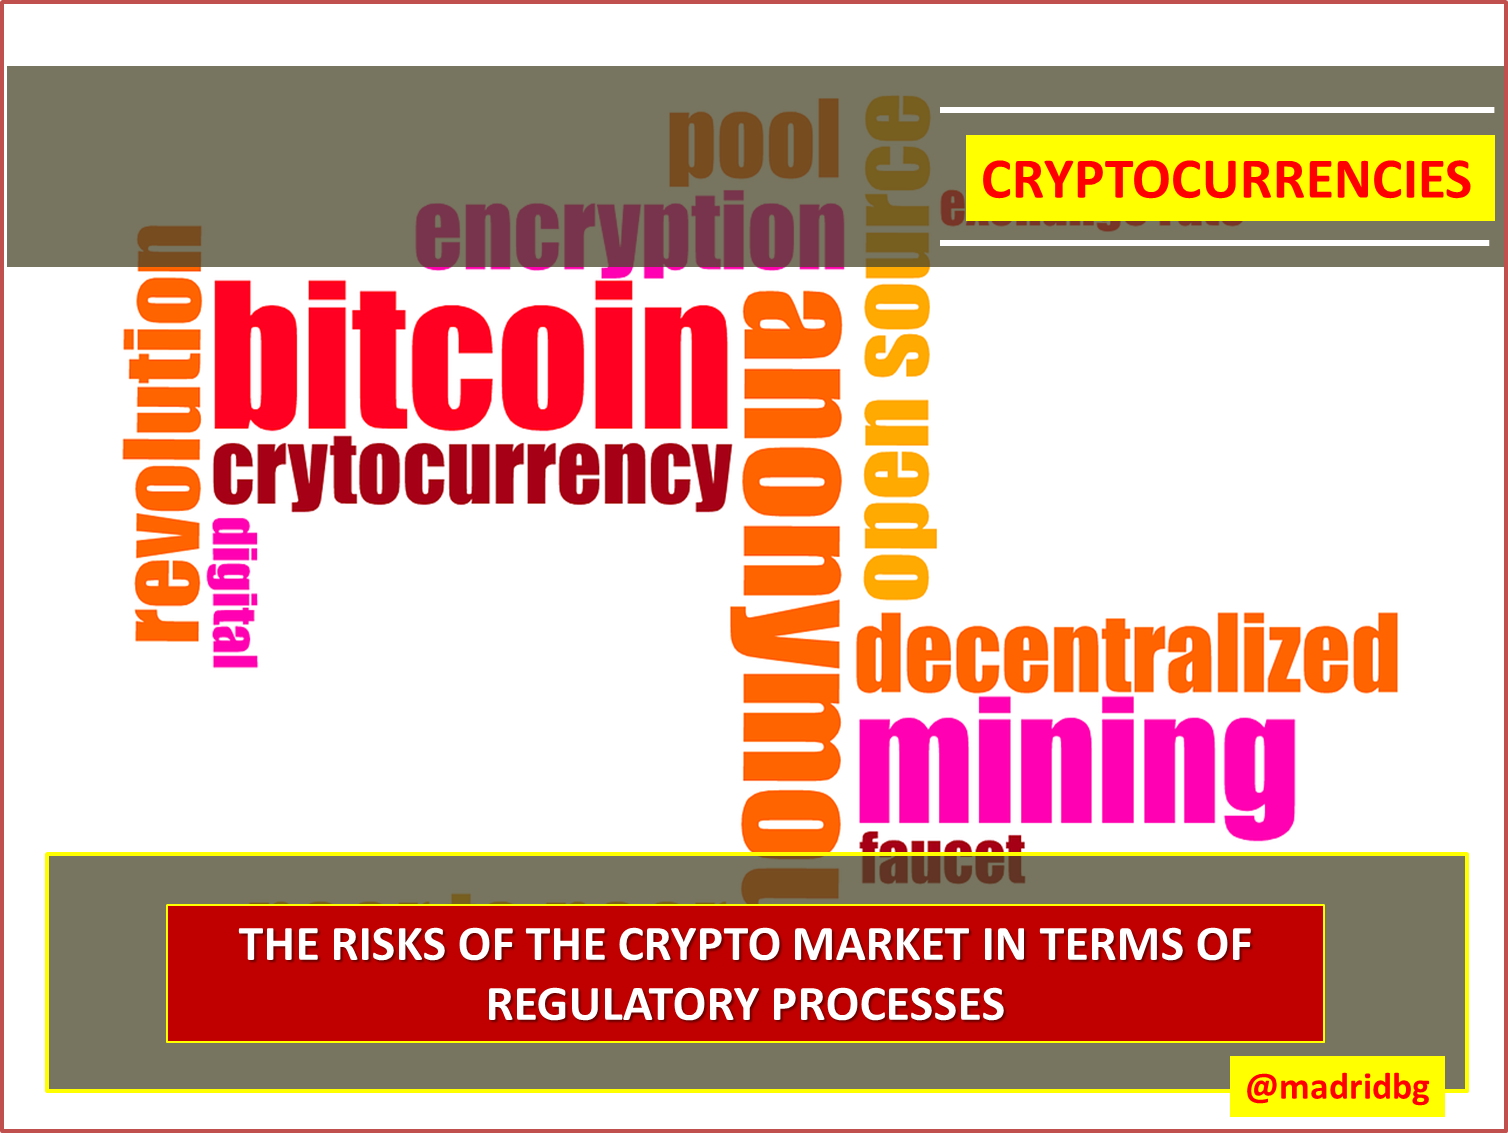 @madridbg/the-risks-of-the-crypto-market-in-terms-of-regulatory-processes